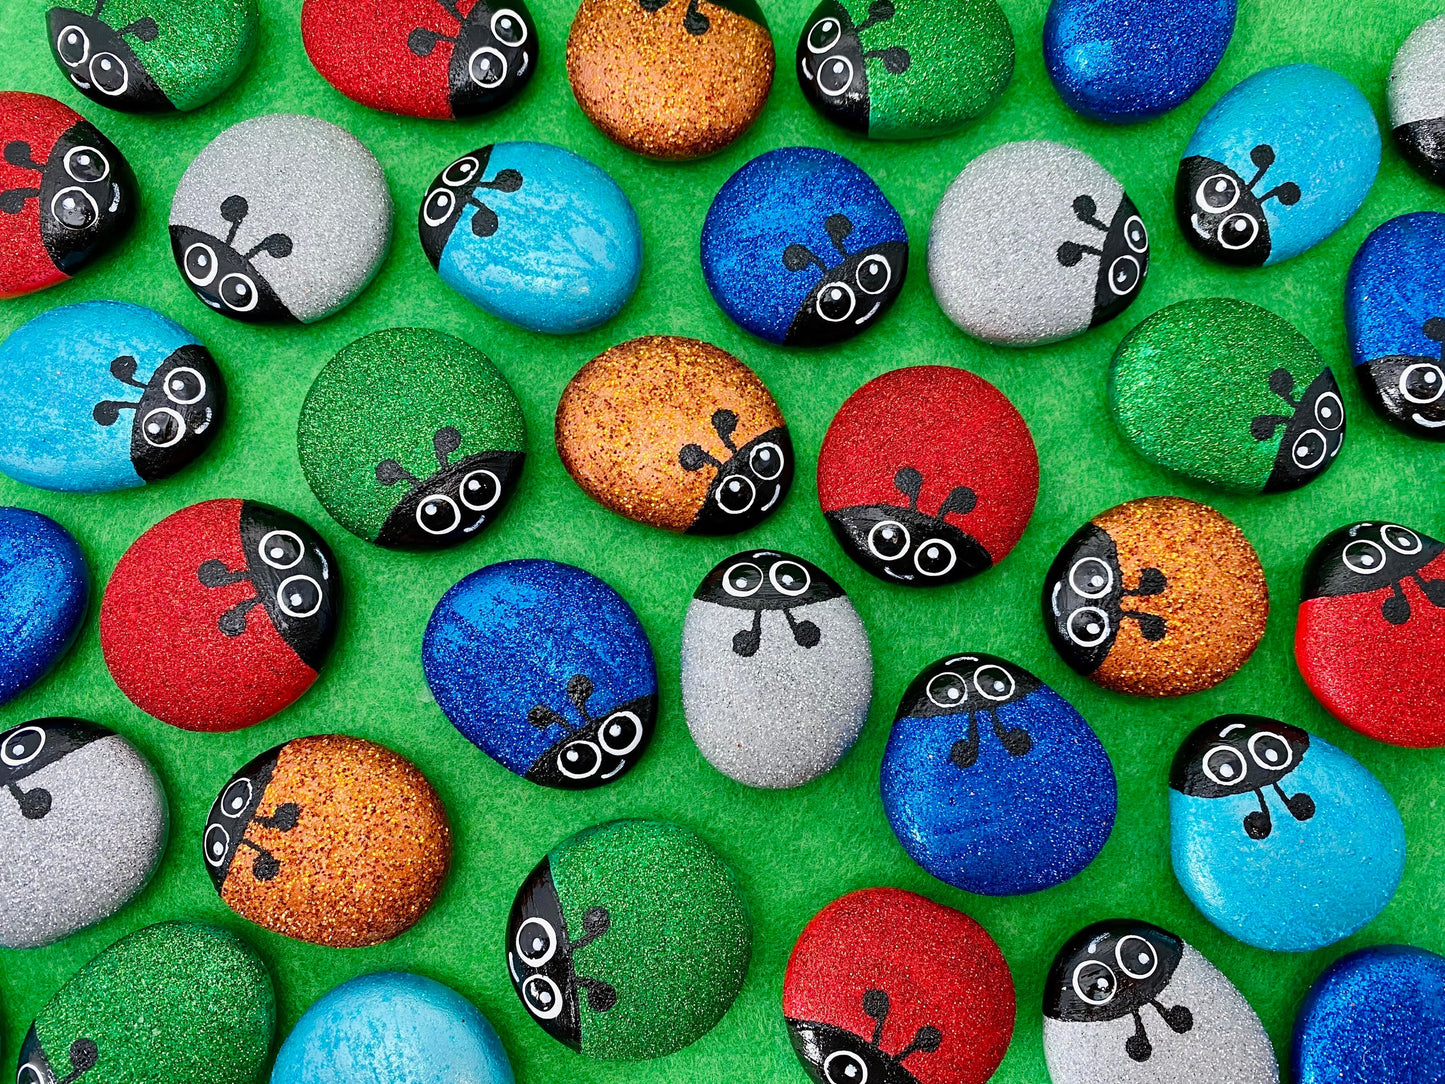 Lots of Hand painted Glitter Bug Pebbles in Red, Green, Blue, Dark Blue, Silver and Gold